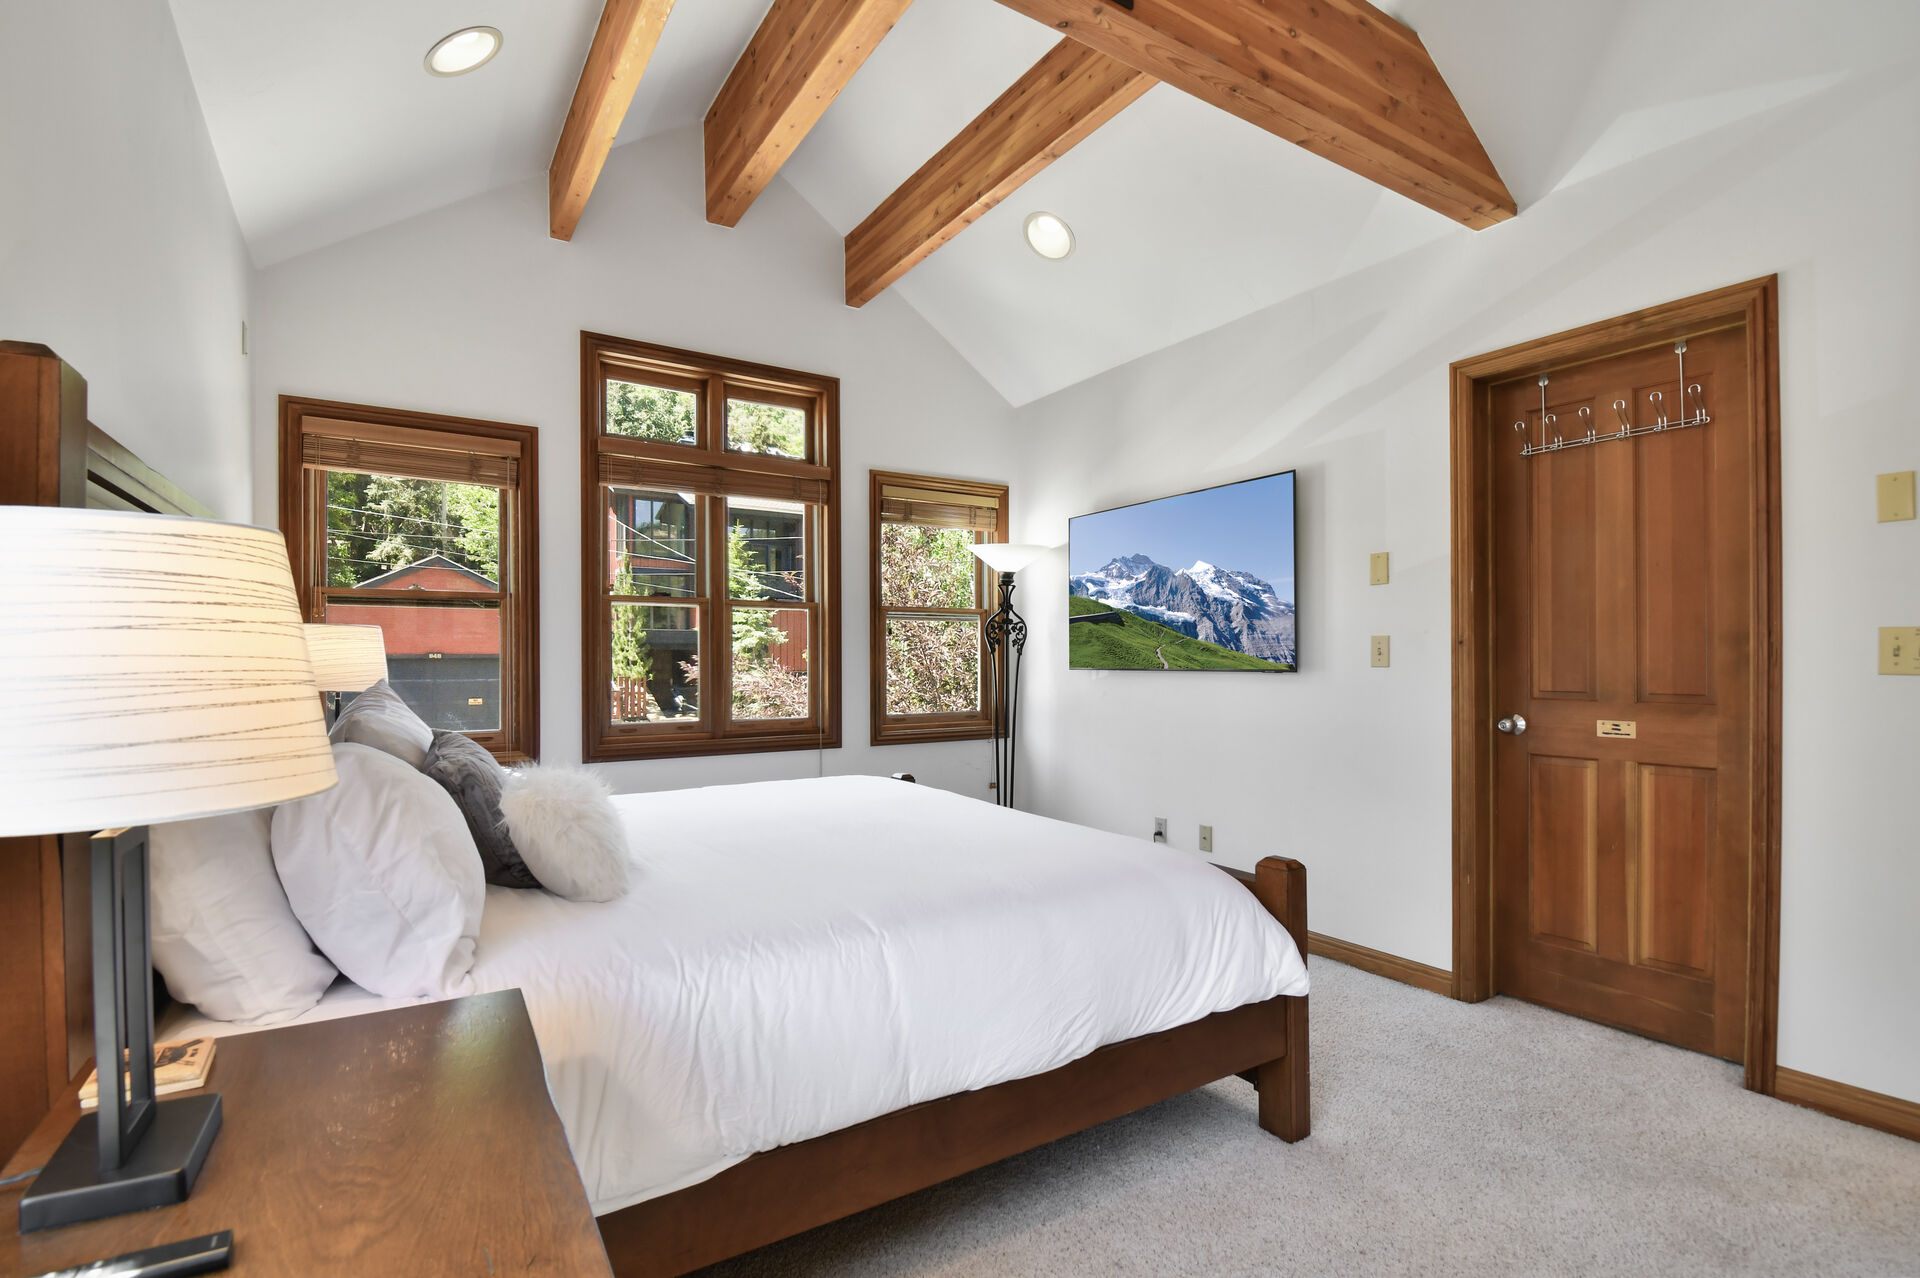 Master bedroom with custom wooden beams in vaulted ceiling room